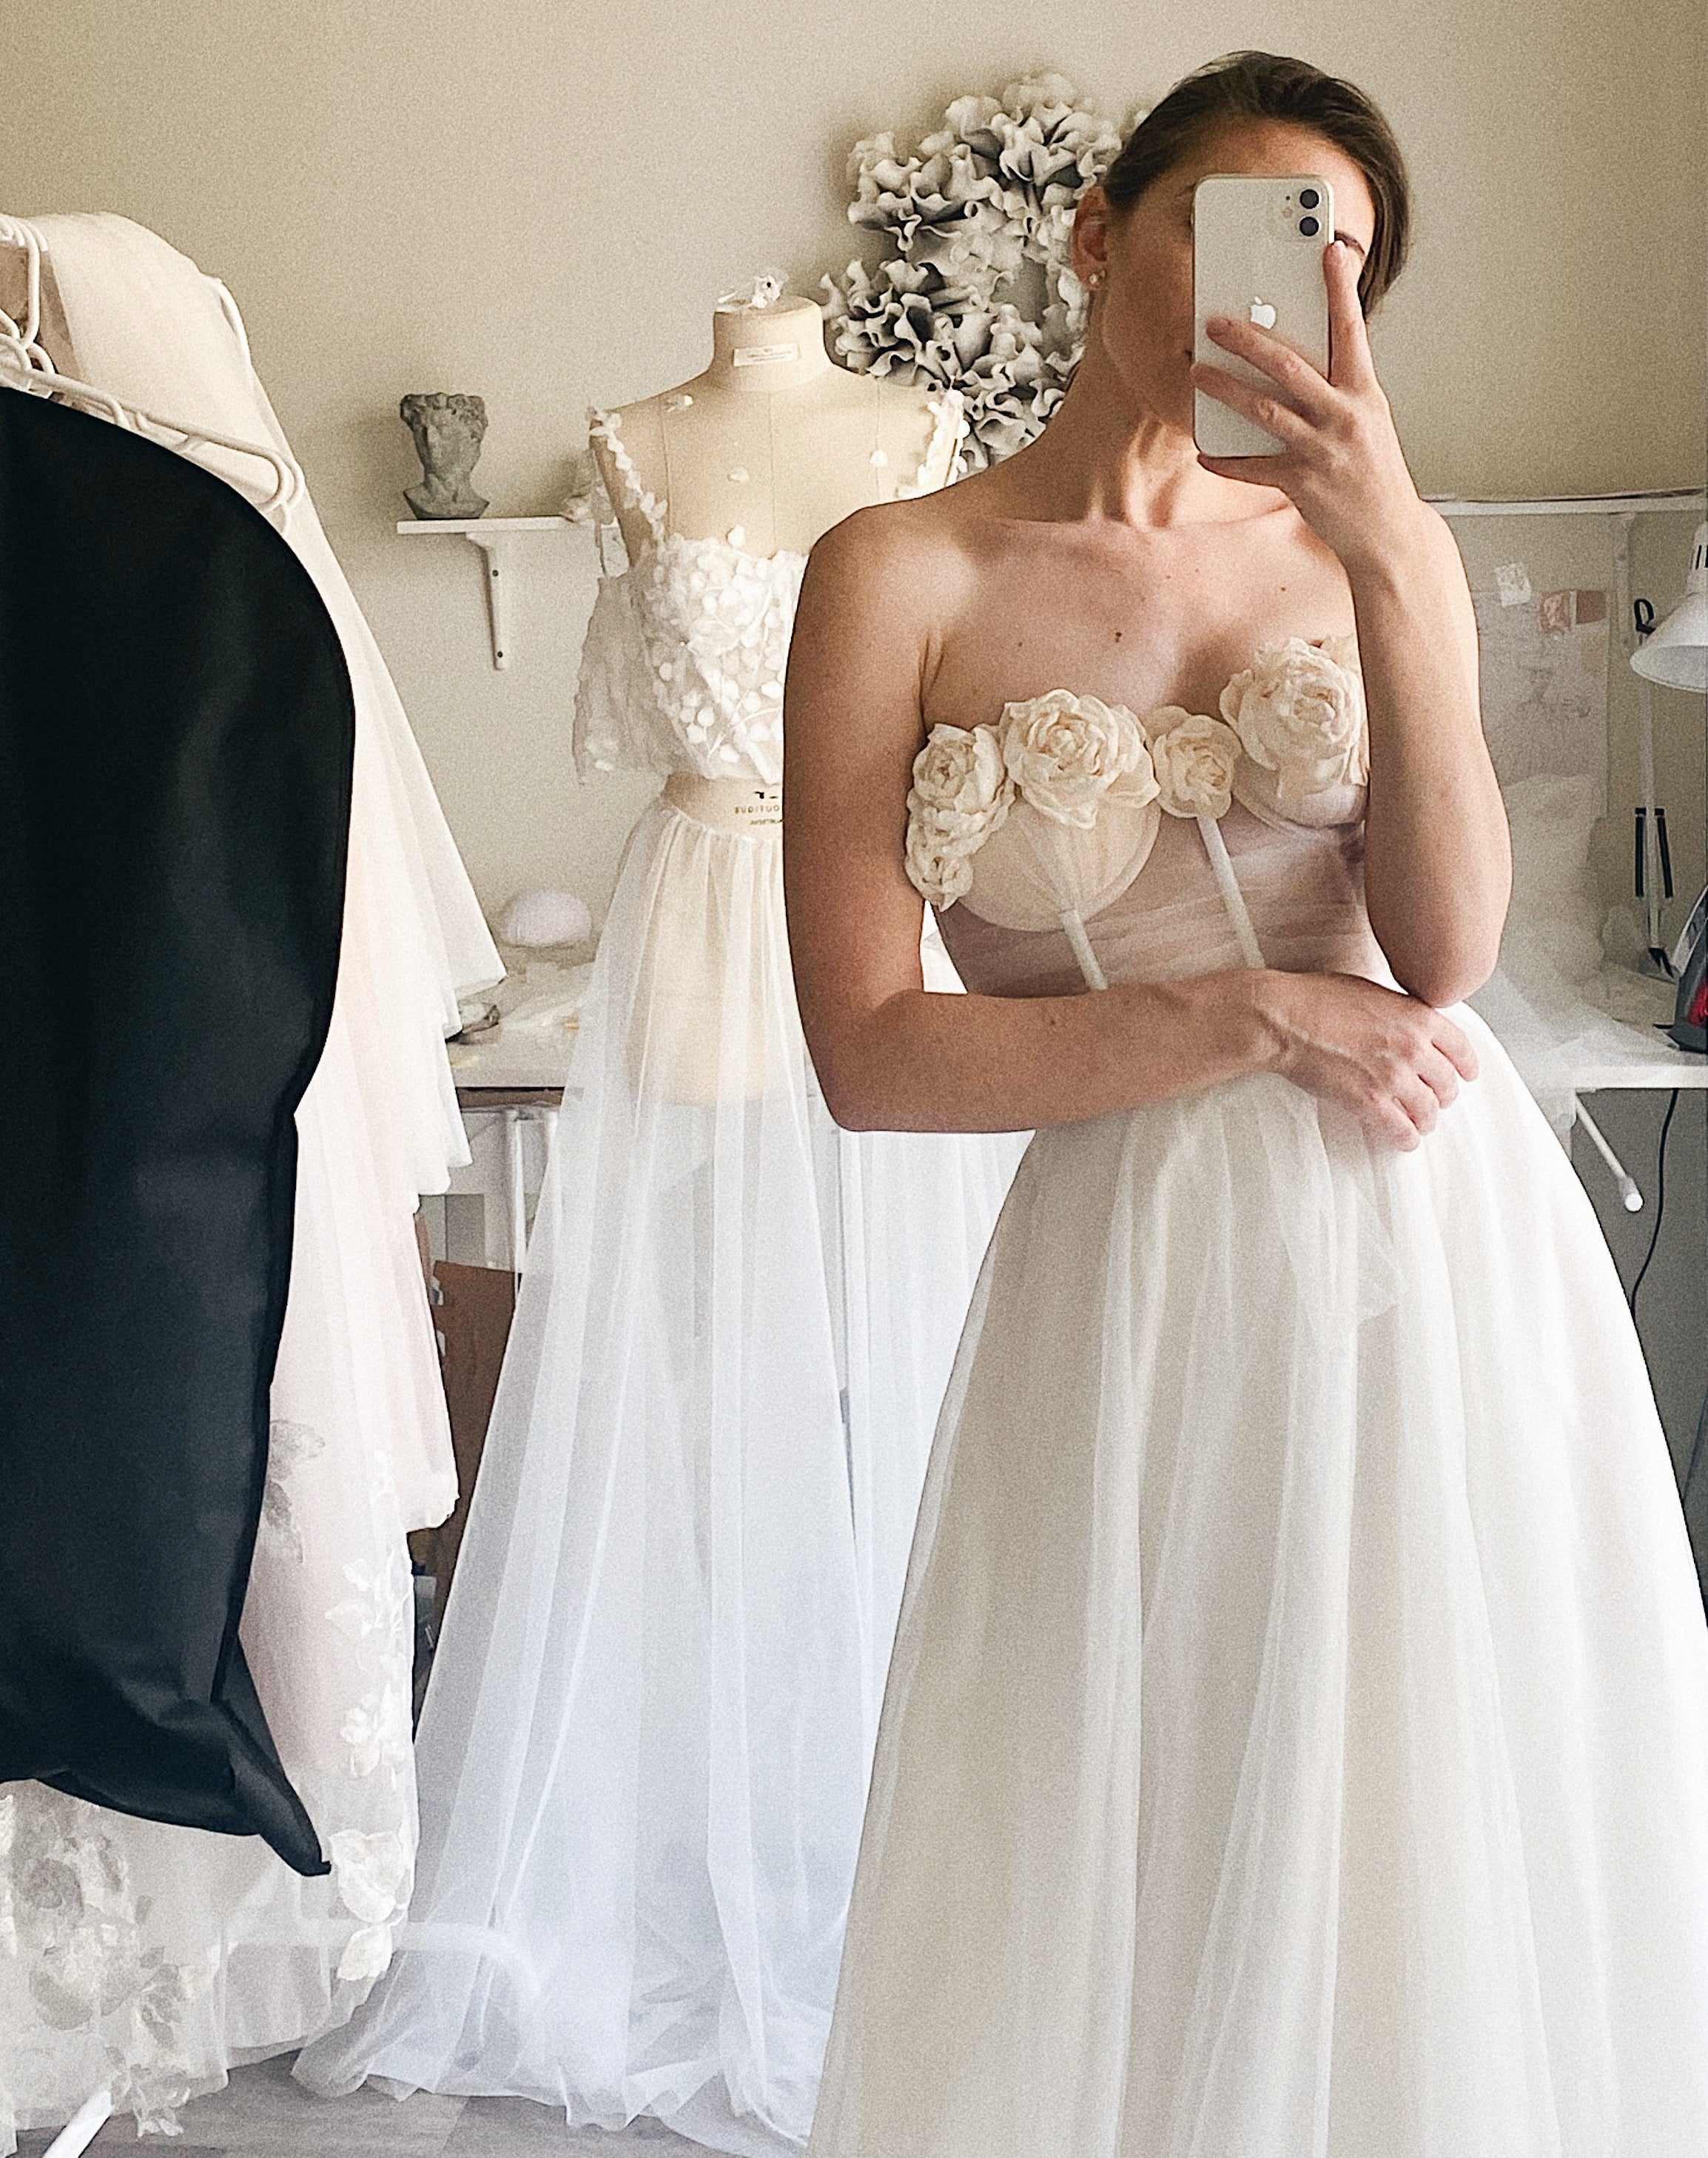 Blooming Beauty: The Perfect Floral Wedding Dress from AW Bridal –  Critiques of a critic